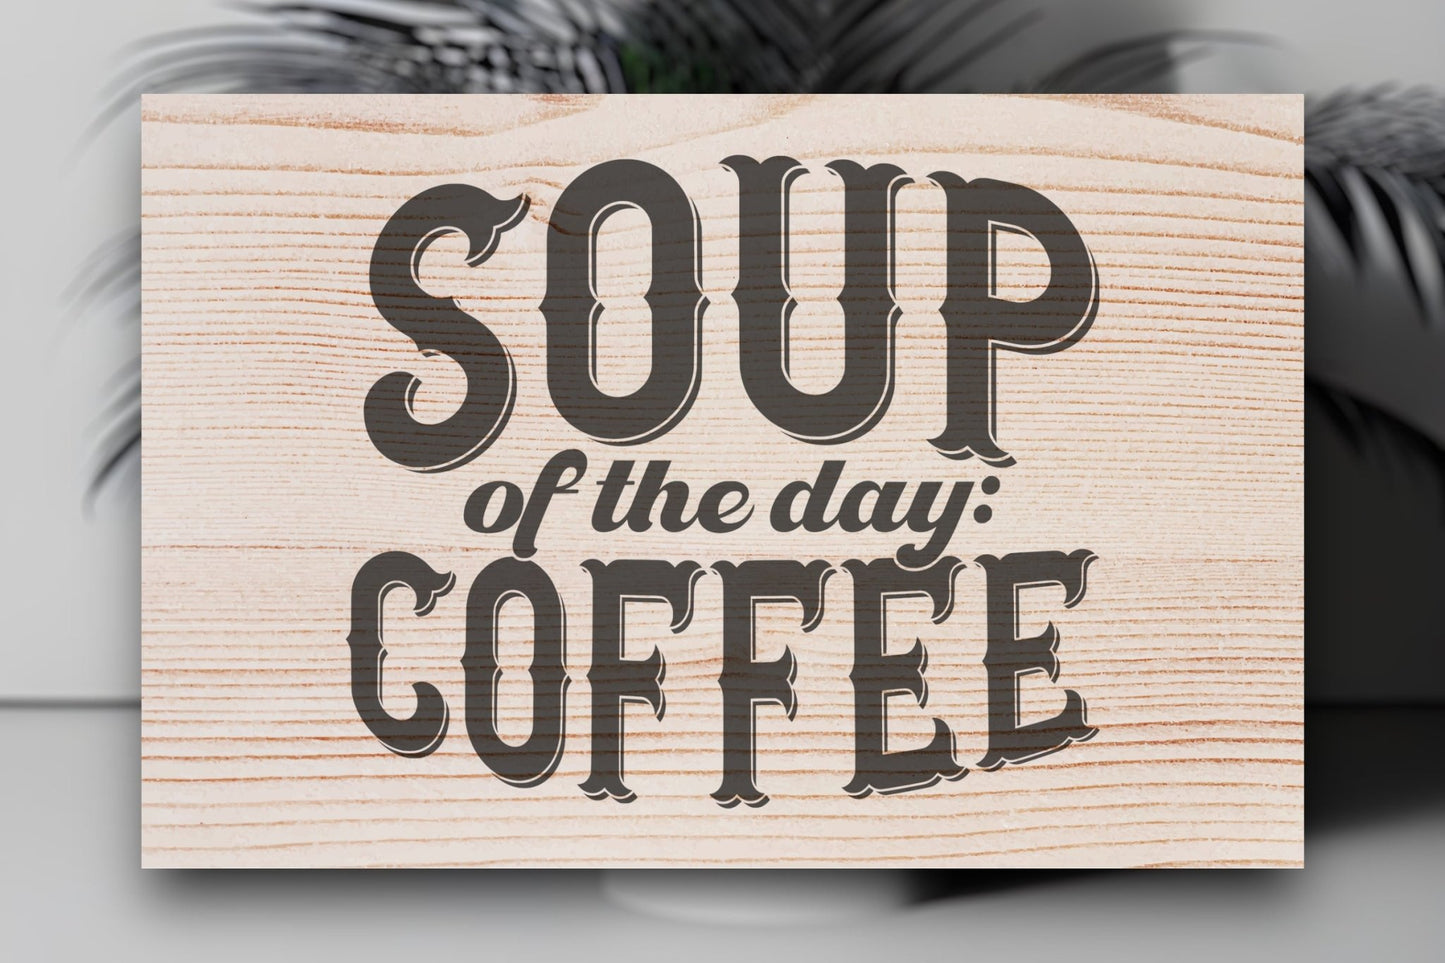 "Soup Of The Day: Coffee" Custom Wood Sign Signs Weaver Custom Engravings   